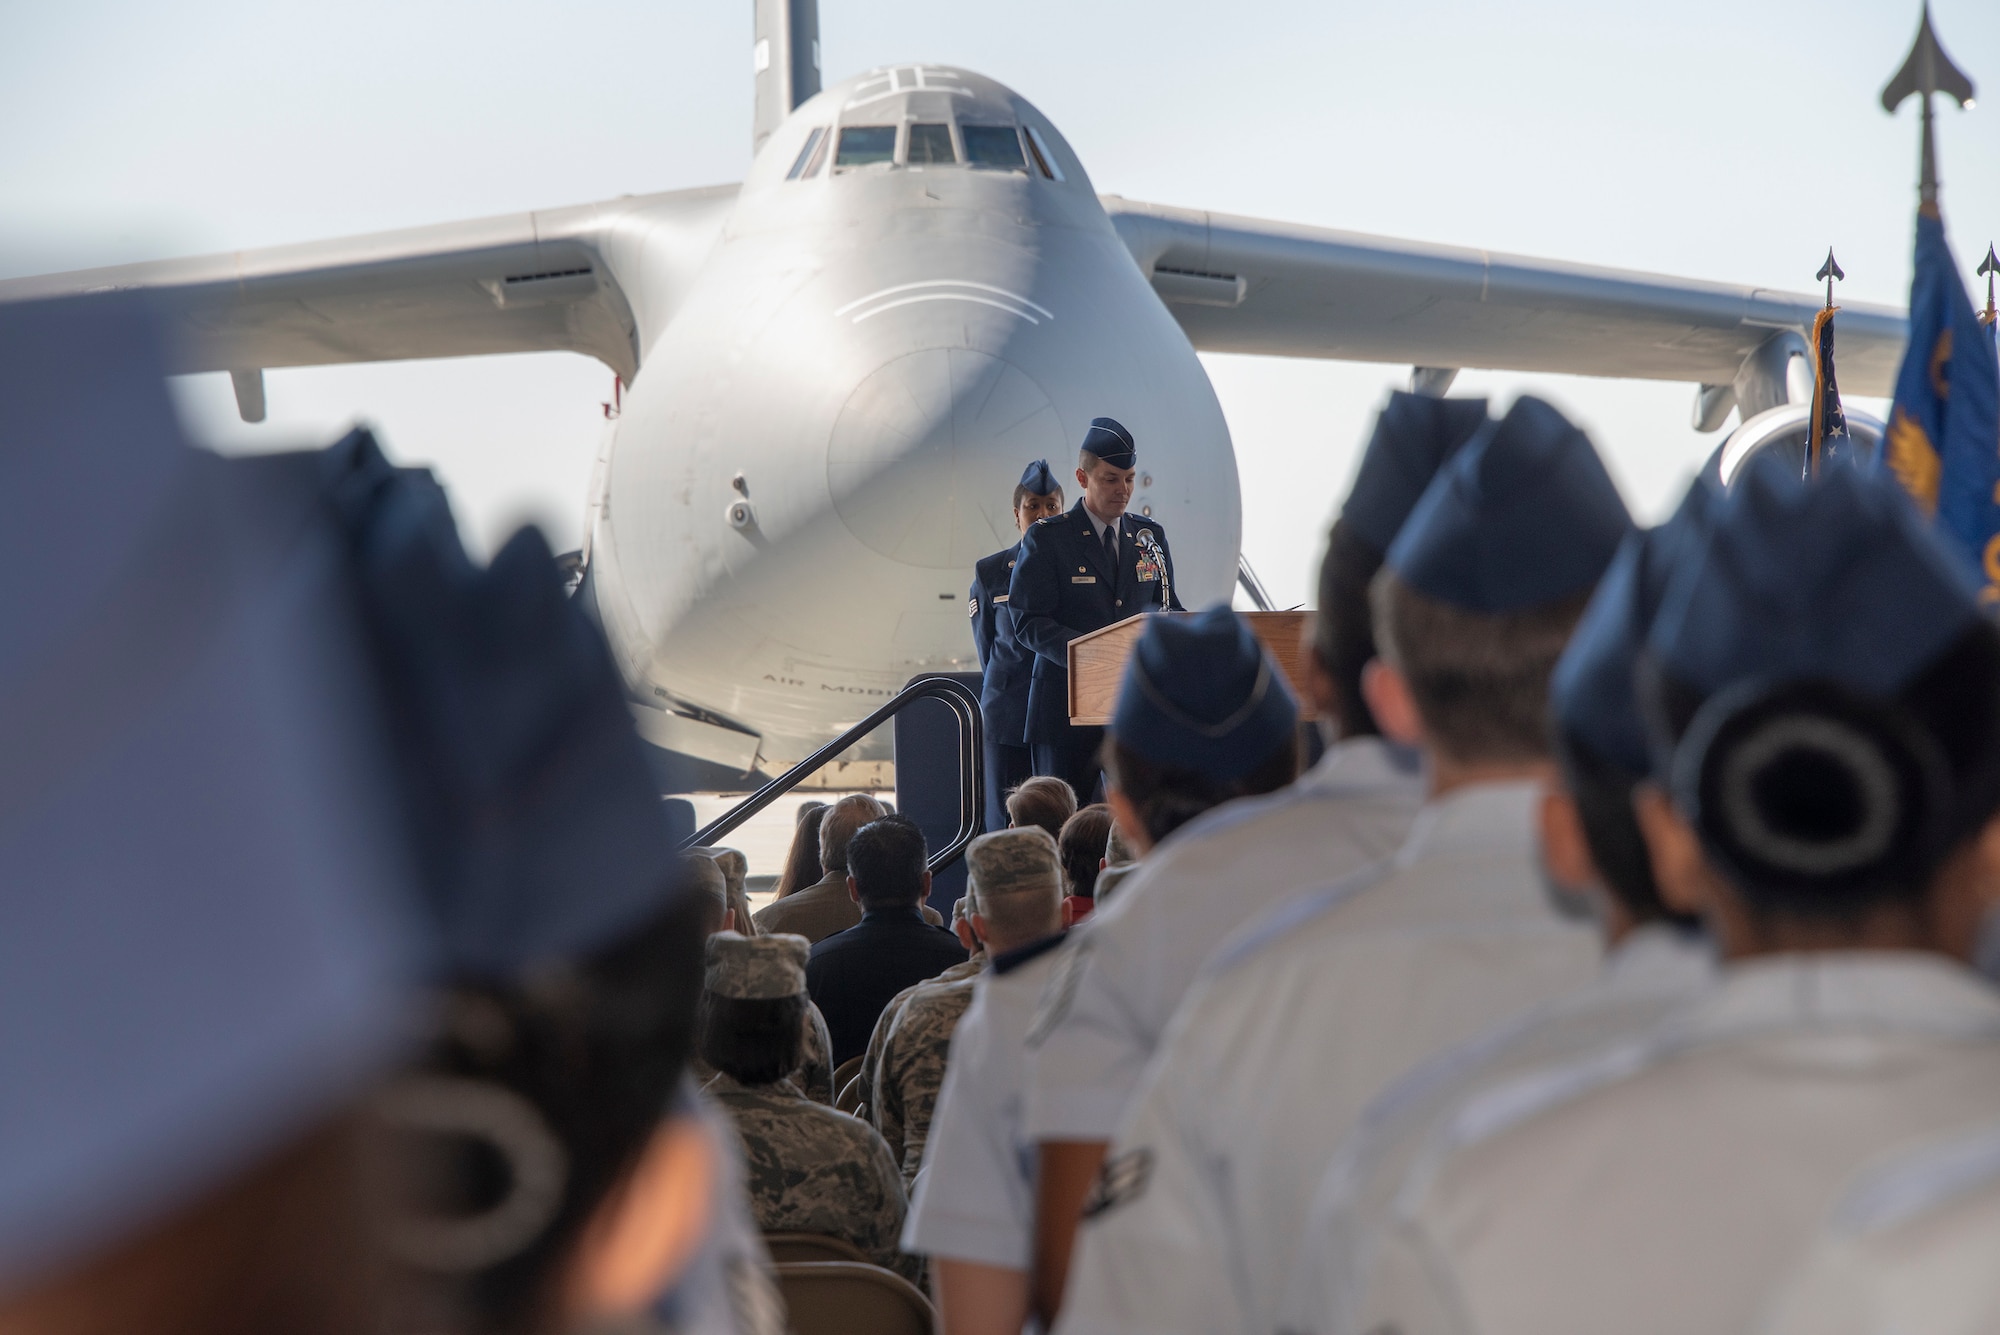 Col. Jeff Nelson, 60th Air Mobility Wing commander, provides remarks during an assumption of command ceremony at Travis Air Force Base, Calif., Sept. 18, 2018. During the ceremony, Nelson assumed command of Air Mobility Command’s largest wing. (U.S. Air Force photo by Heide Couch)